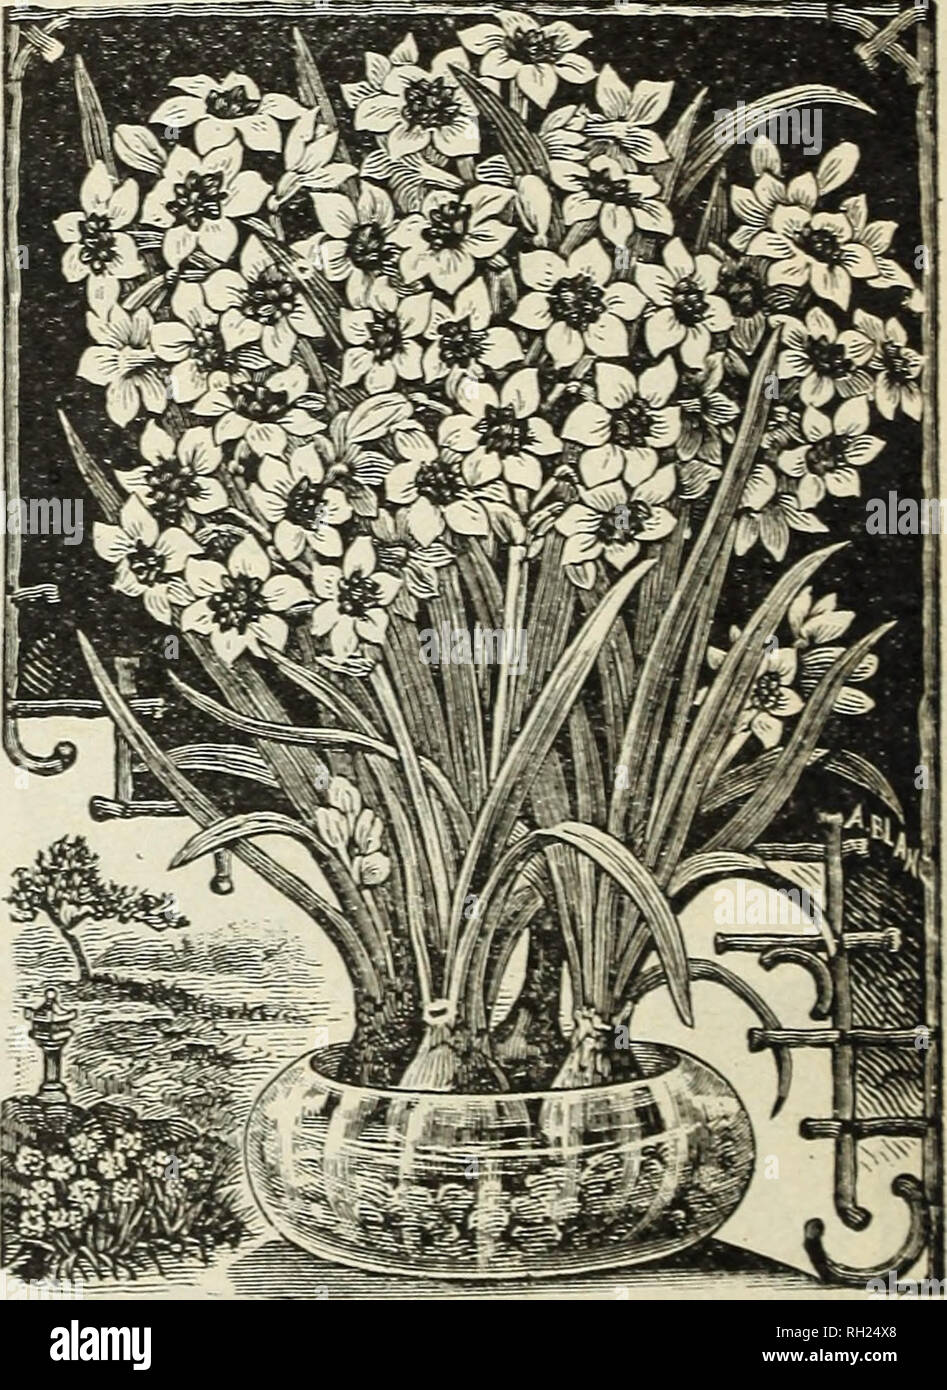 . Bulbs and plants : autumn 1901. Flowers Seeds Catalogs; Bulbs (Plants) Seeds Catalogs; Vegetables Seeds Catalogs; Nurseries (Horticulture) Catalogs; Plants, Ornamental Catalogs; Gardening Equipment and supplies Catalogs. PAPER WHITE POLYANTHUS NARCISSUS. If by mail, add 40 cts. per 100. Double Narcissus. Each. Doz. Per 100 Albus Plenus Odoratus—Pure white, sweet scented, resembles a Gardenia '. 3 30 S1 50 Incomparable— I Bu tter and Eggs) sulphur yellow, sweet scented 3 30 1 50 Orange Phoenix—White and orange 5 45 3 OO Von Sion — The finest of all double yellow Daffodils, used extensively fo Stock Photo